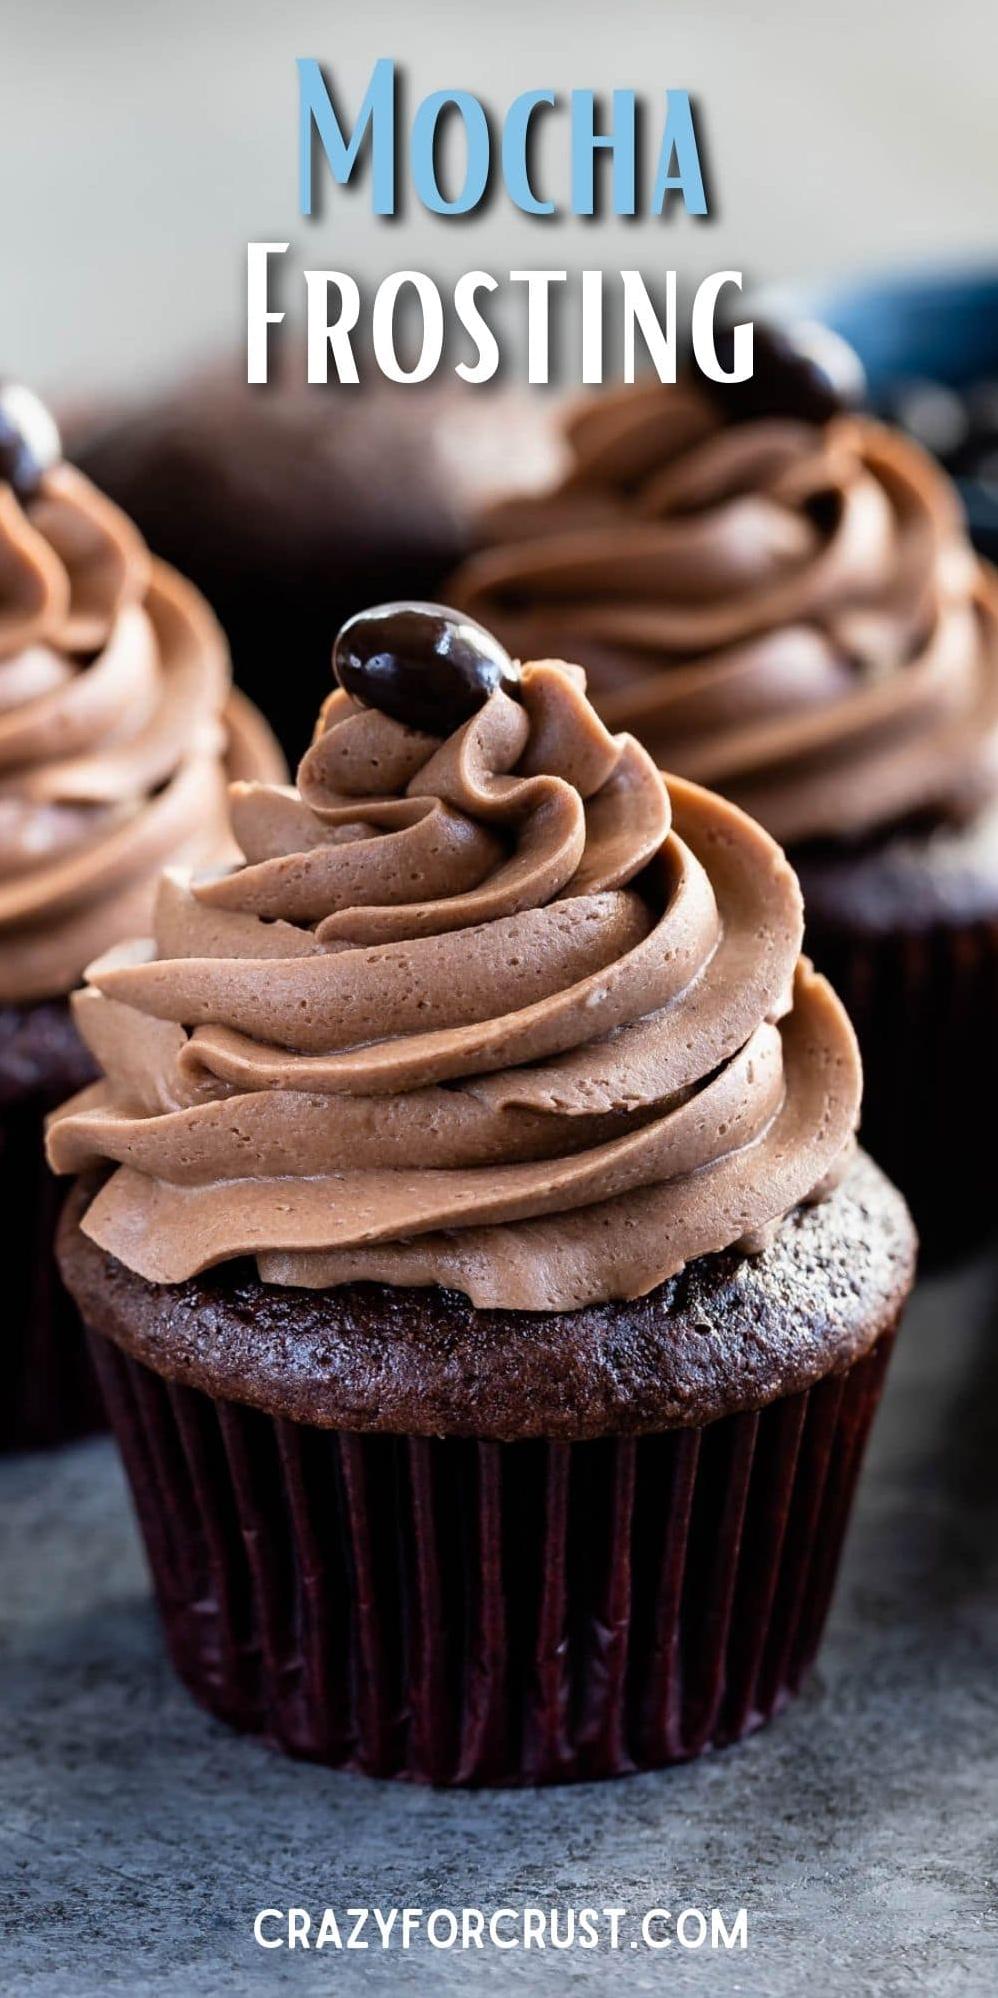  Indulge in the decadent Fluffy Chocolate Mocha Icing!